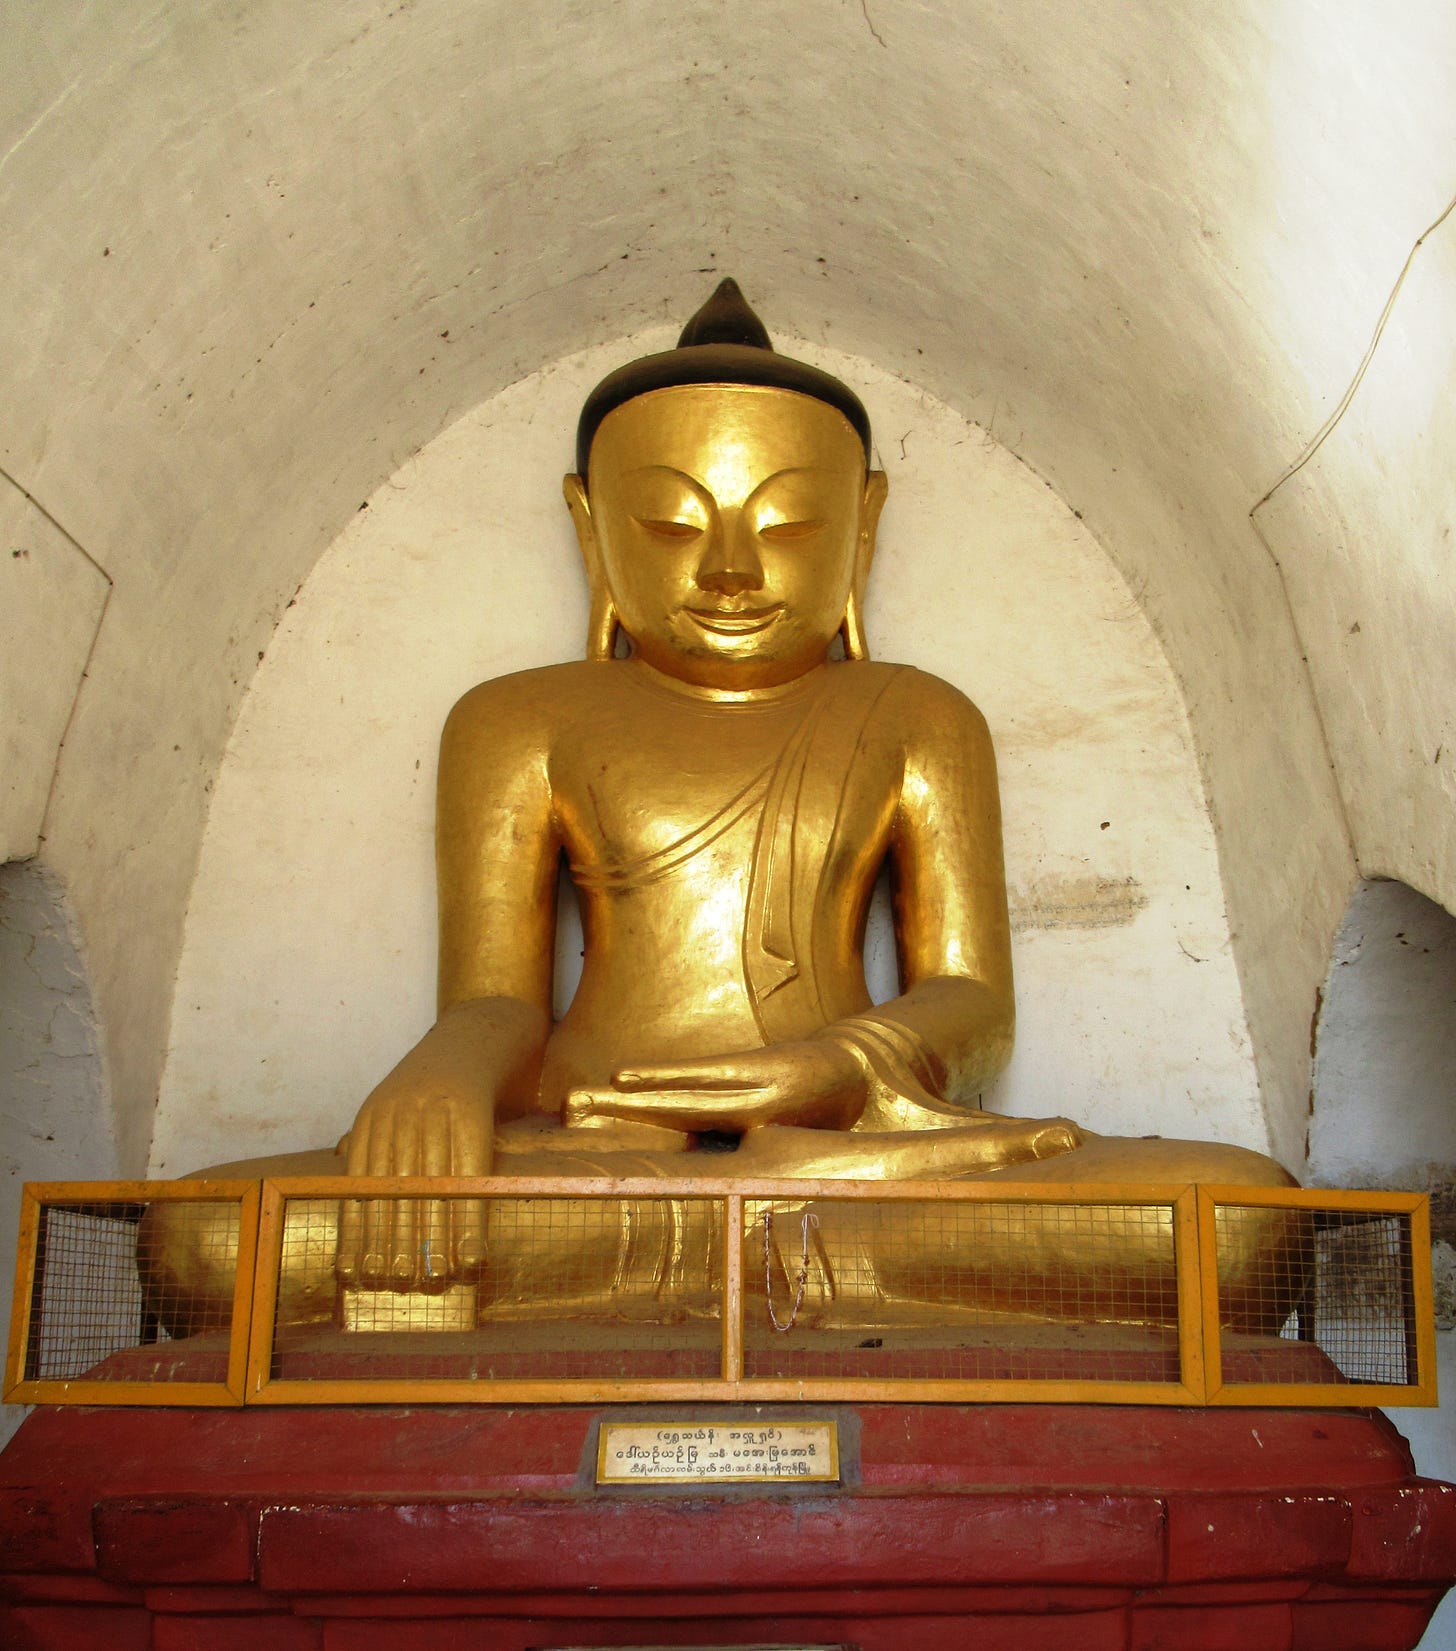 A golden seated Buddha in an alcove photo taken in Myanmar in 2018